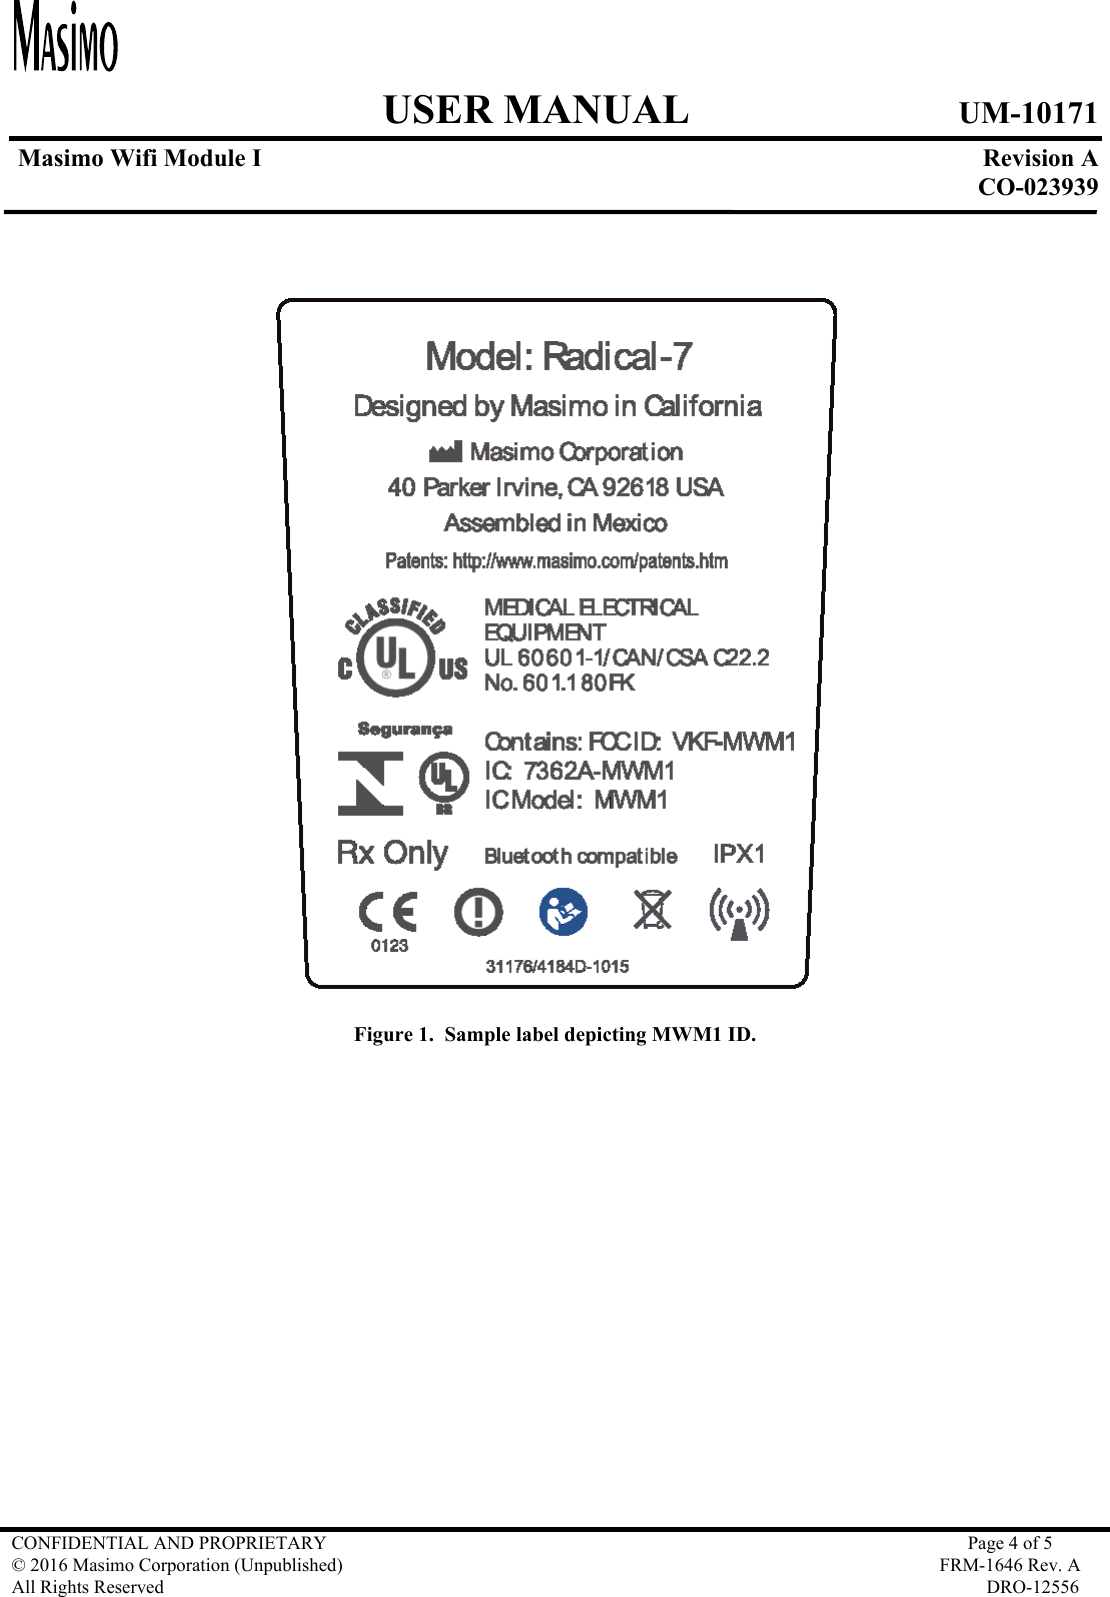     USER MANUAL UM-10171   Masimo Wifi Module I  Revision A  CO-023939  CONFIDENTIAL AND PROPRIETARY  Page 4 of 5 © 2016 Masimo Corporation (Unpublished)  FRM-1646 Rev. A All Rights Reserved  DRO-12556      Figure 1.  Sample label depicting MWM1 ID.  